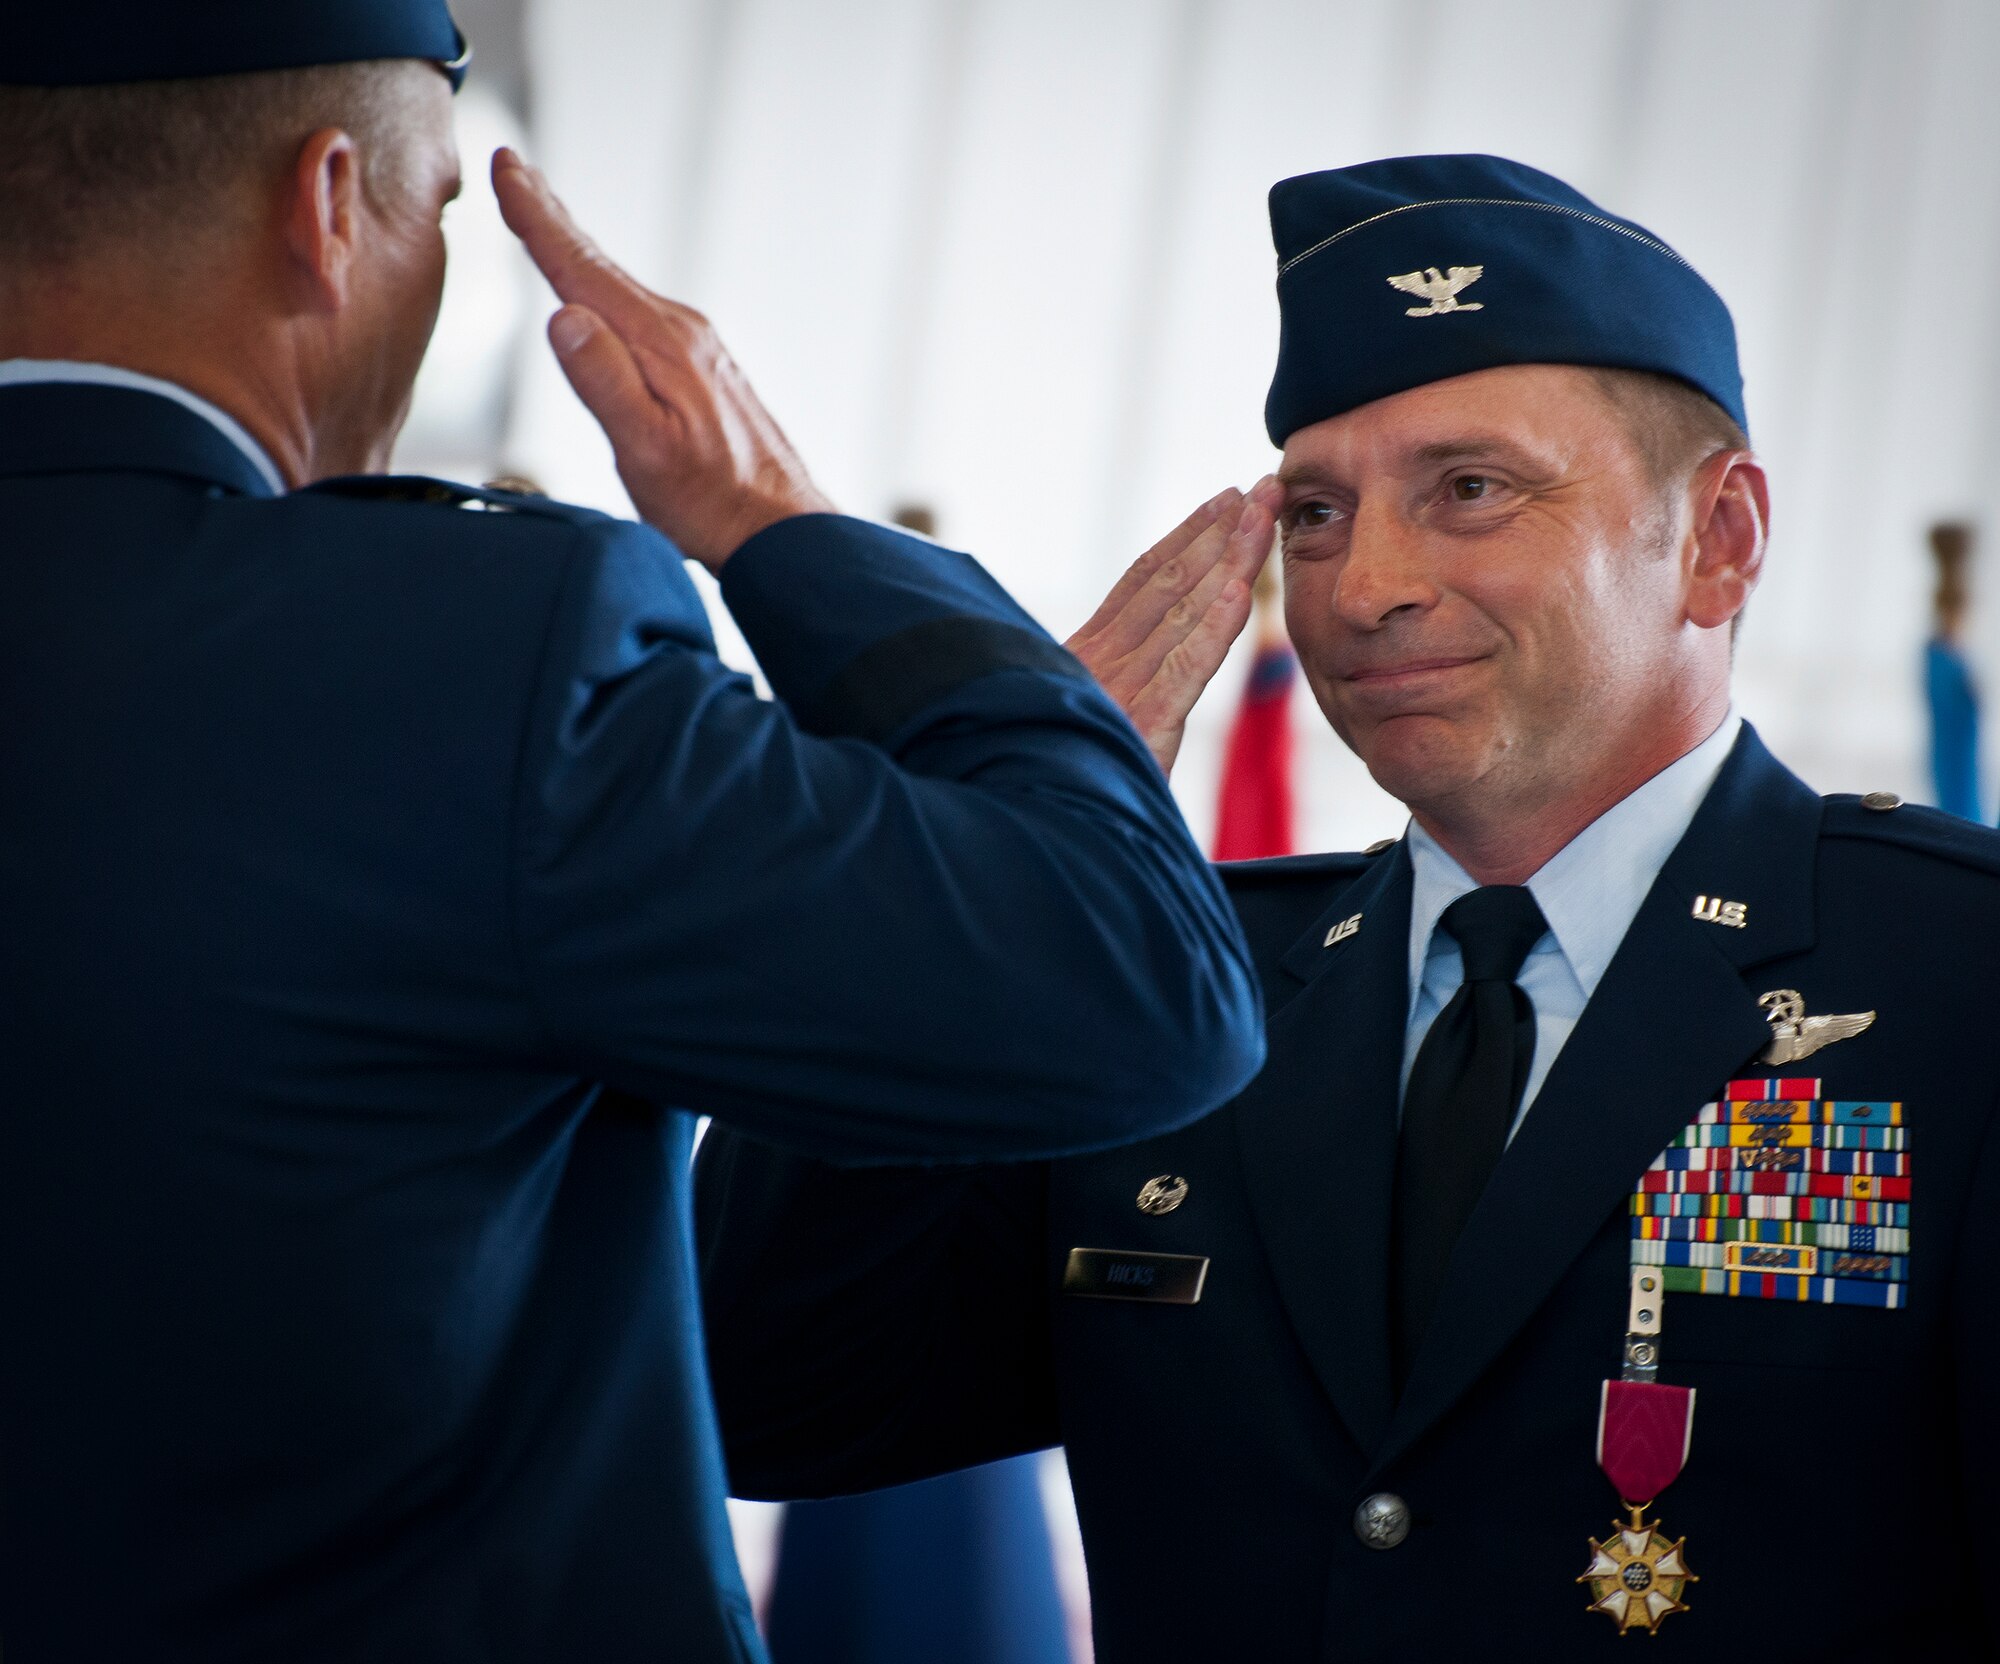 Col. David Hicks salutes Maj. Gen. Jeffrey Lofgren, the U.S. Air Force Warfare Center commander, after turning over command during the 53rd Wing’s change of command ceremony May 30 at Eglin Air Force Base, Fla.  Col. Alexus Grynkewich took command of the wing from Hicks, who leaves to become the deputy director of operations for North American Aerospace Defense Command at Peterson, AFB, Colo.  (U.S. Air Force photo/Samuel King Jr.)